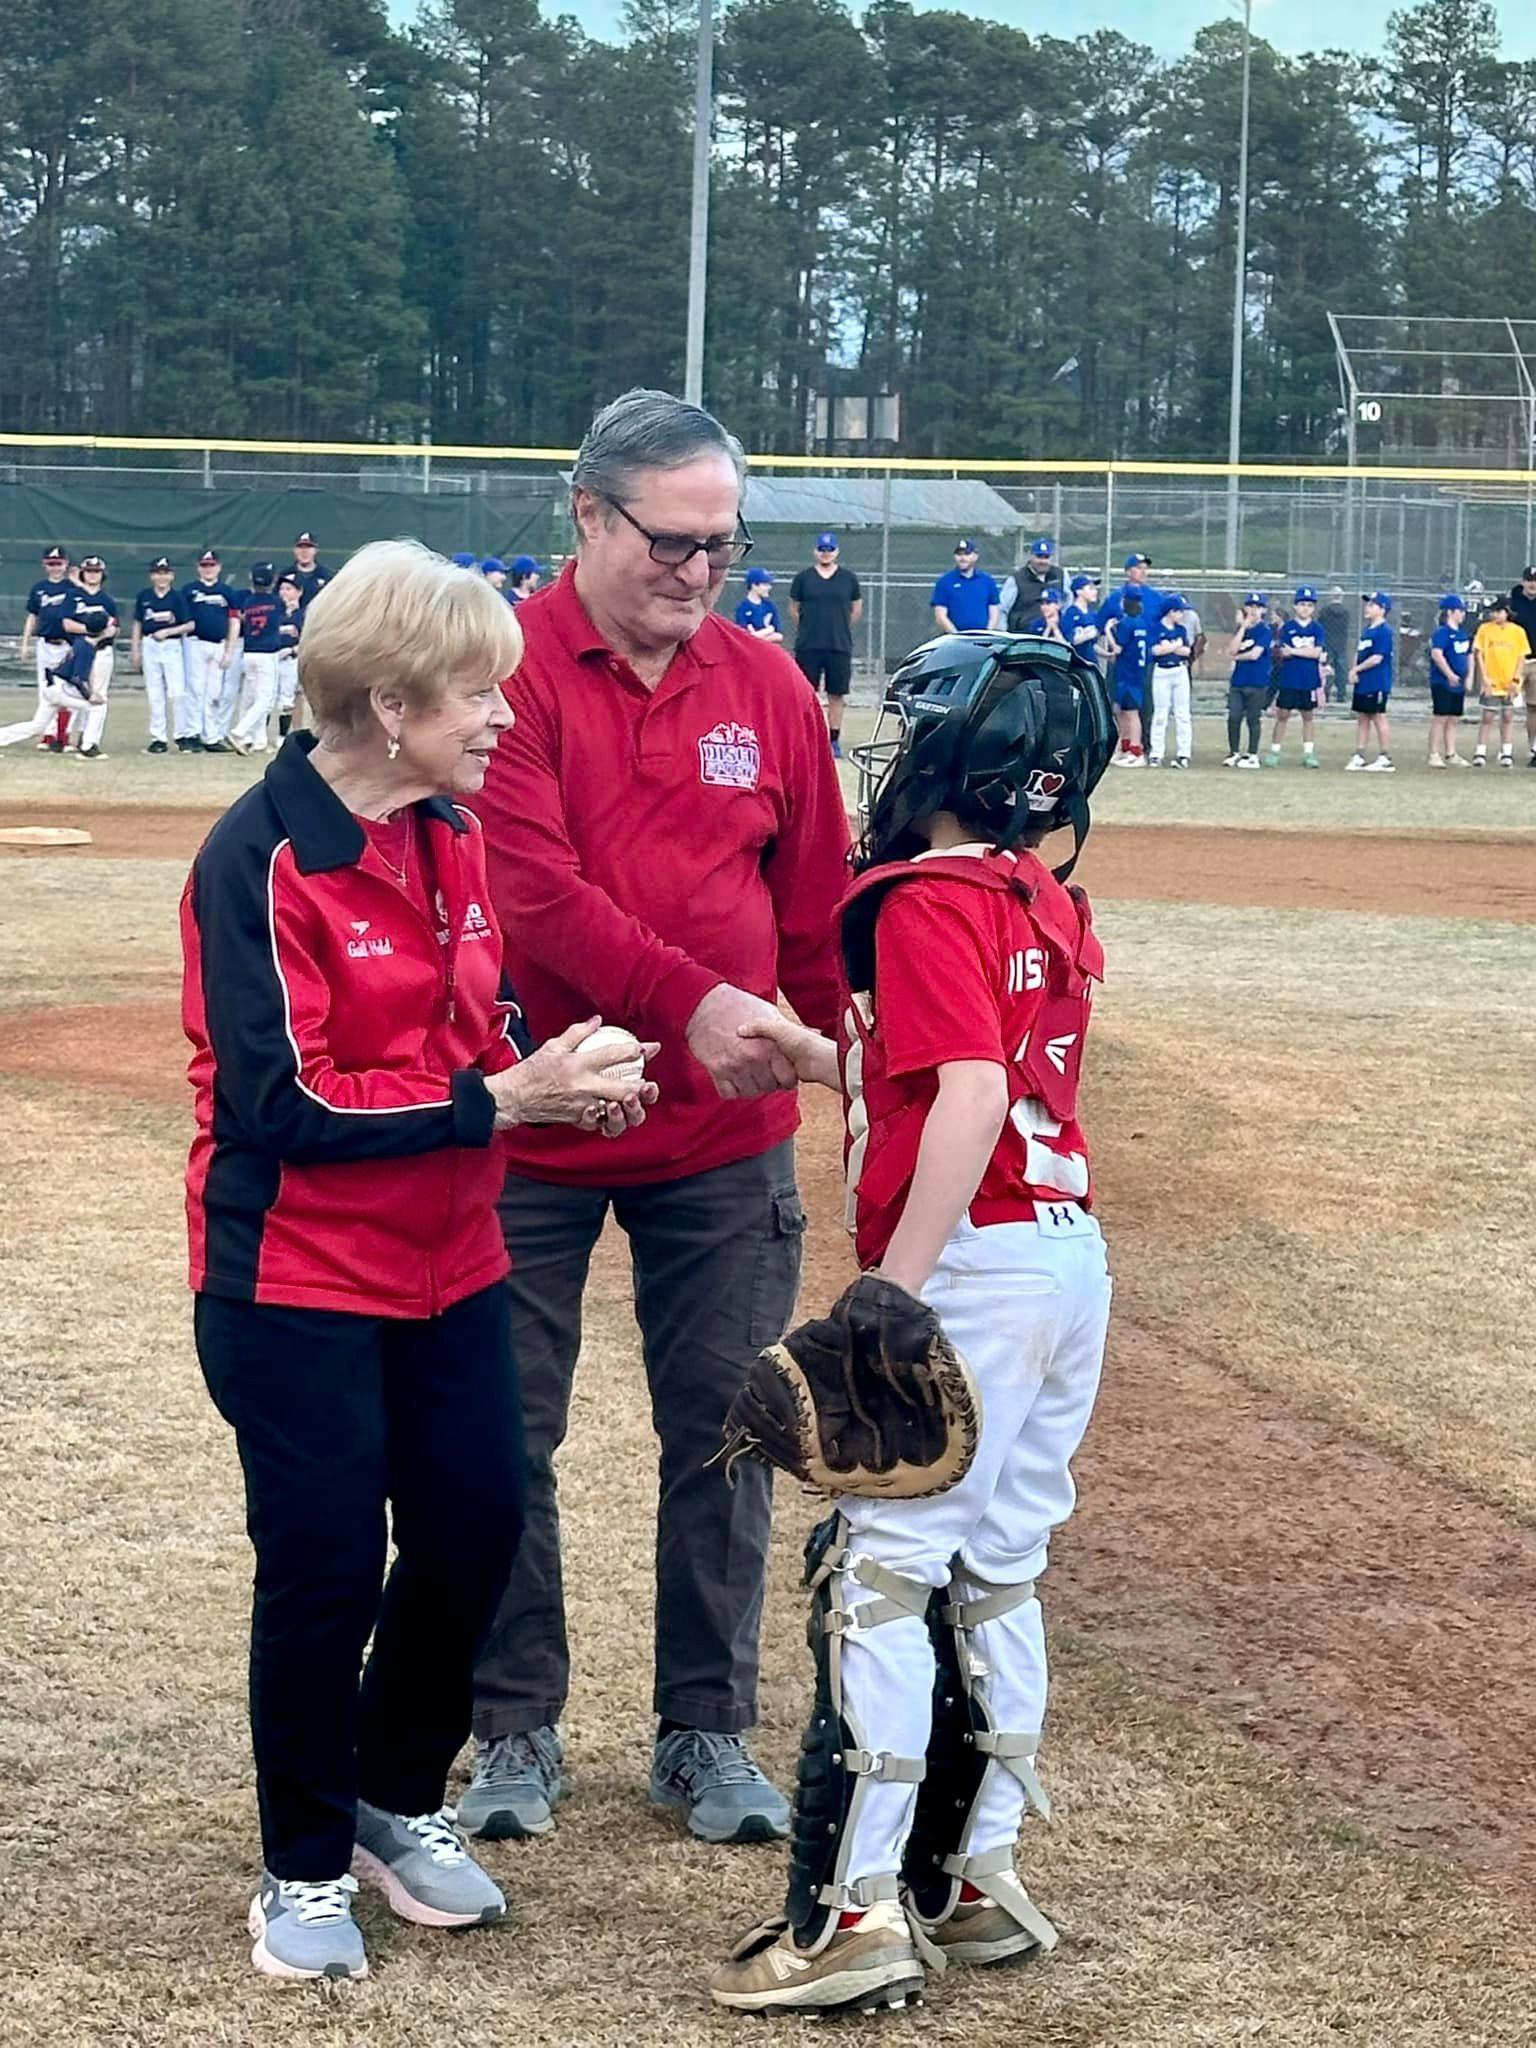 Thank you Tuckahoe Little League for inviting us to opening night on Friday. Lew And Gail had a ball Disco Sports Richmond (804)285-4242